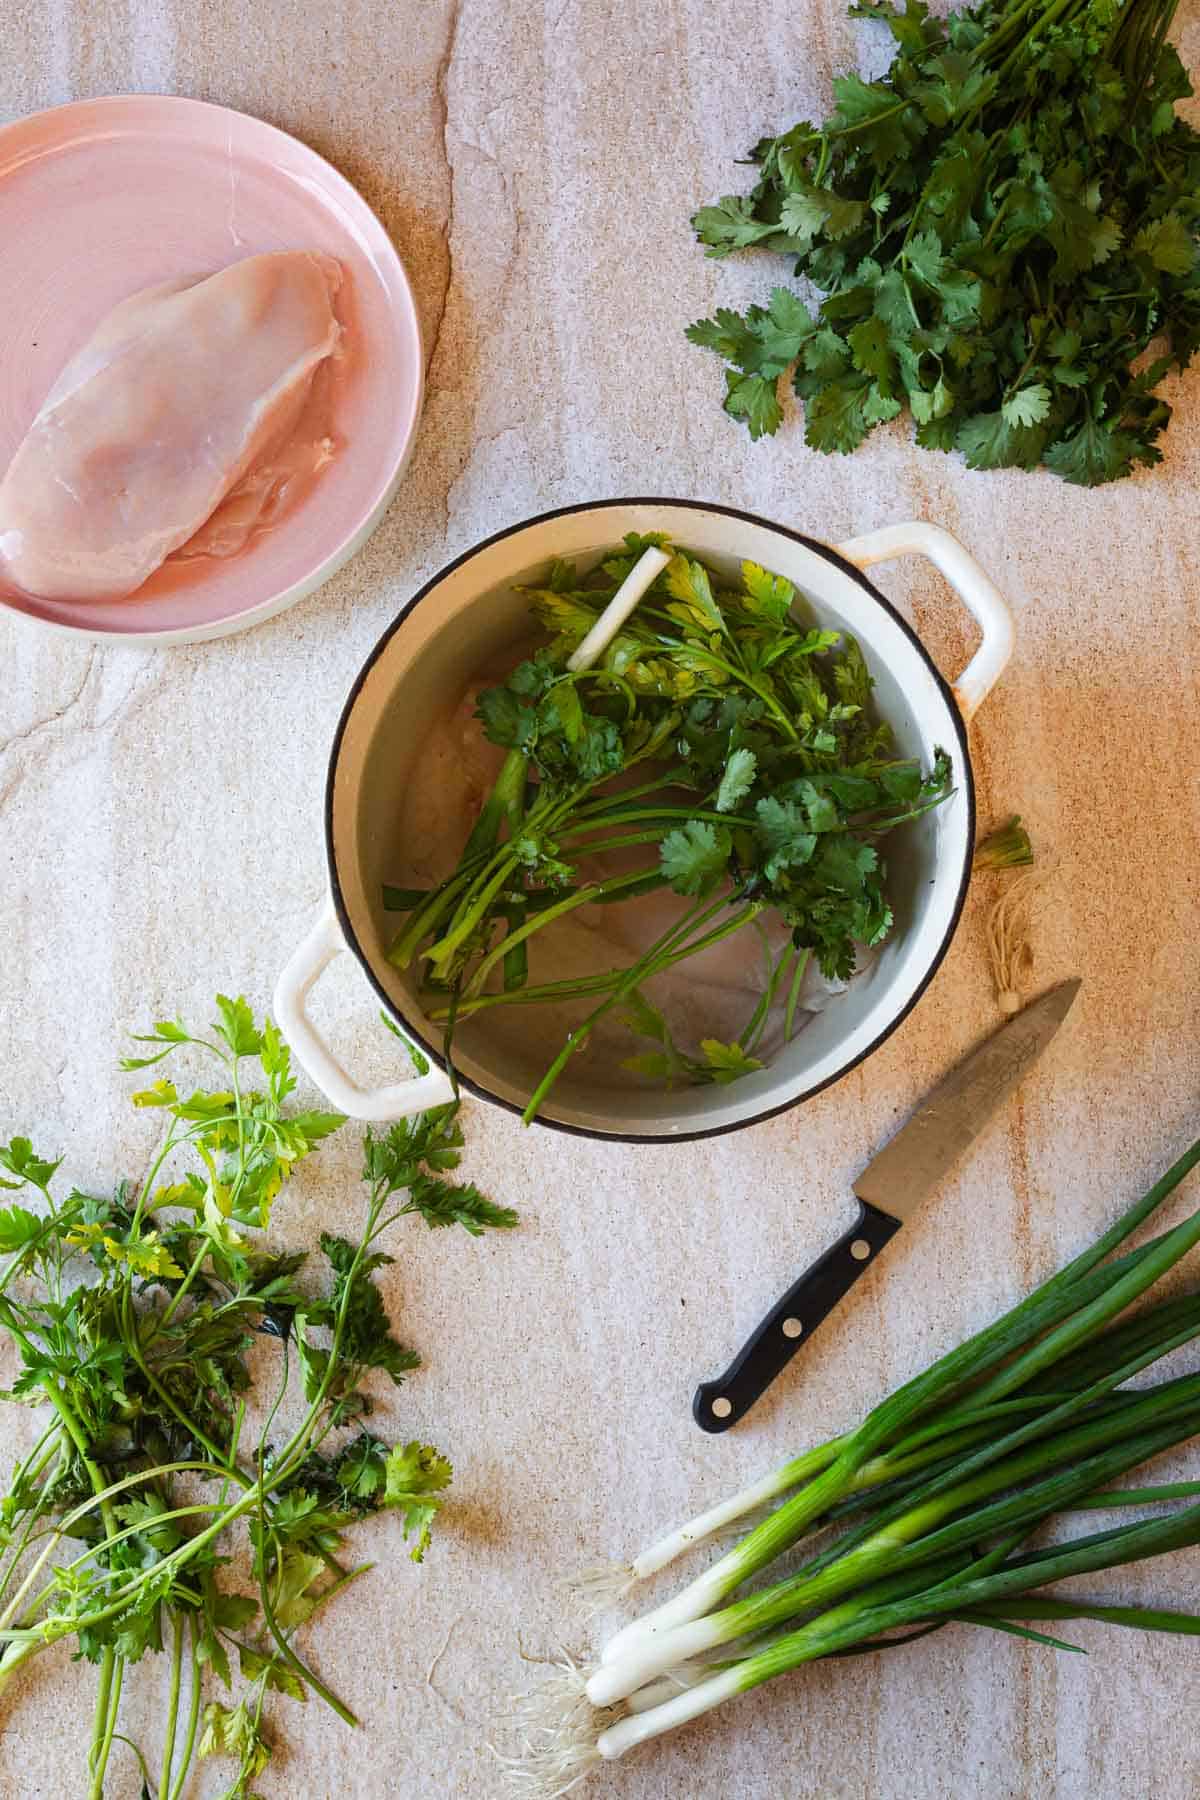 Fresh ingredients laid out on a countertop, including a raw chicken breast, a bunch of cilantro, green onions, and a pot with herbs soaking in water to create a chicken broth.